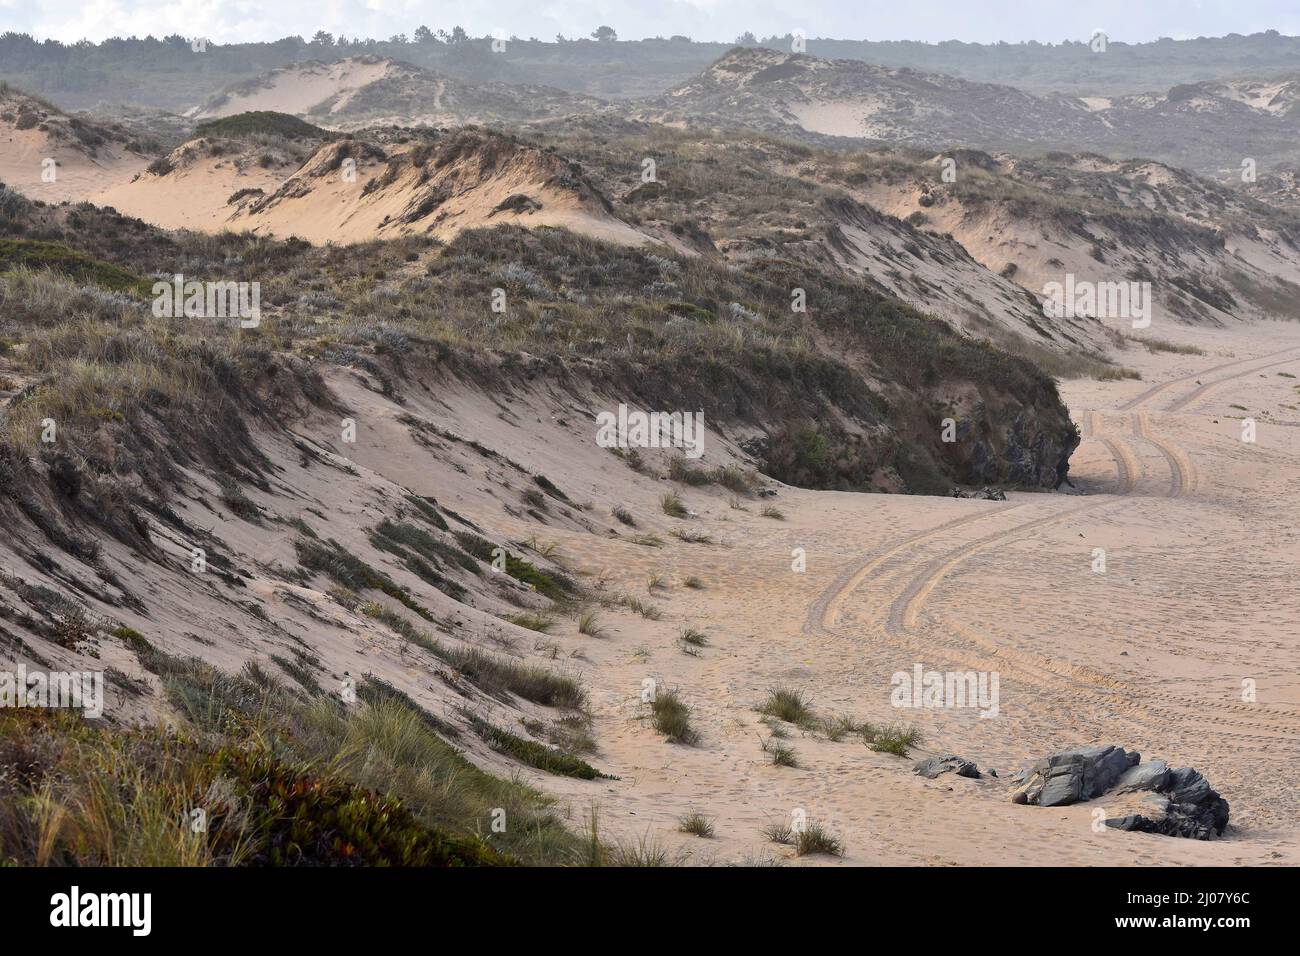 Grassy sand dunes, Southwest Alentejo and Vicentine Coast Natural Park in the southwest of Portugal. Stock Photo